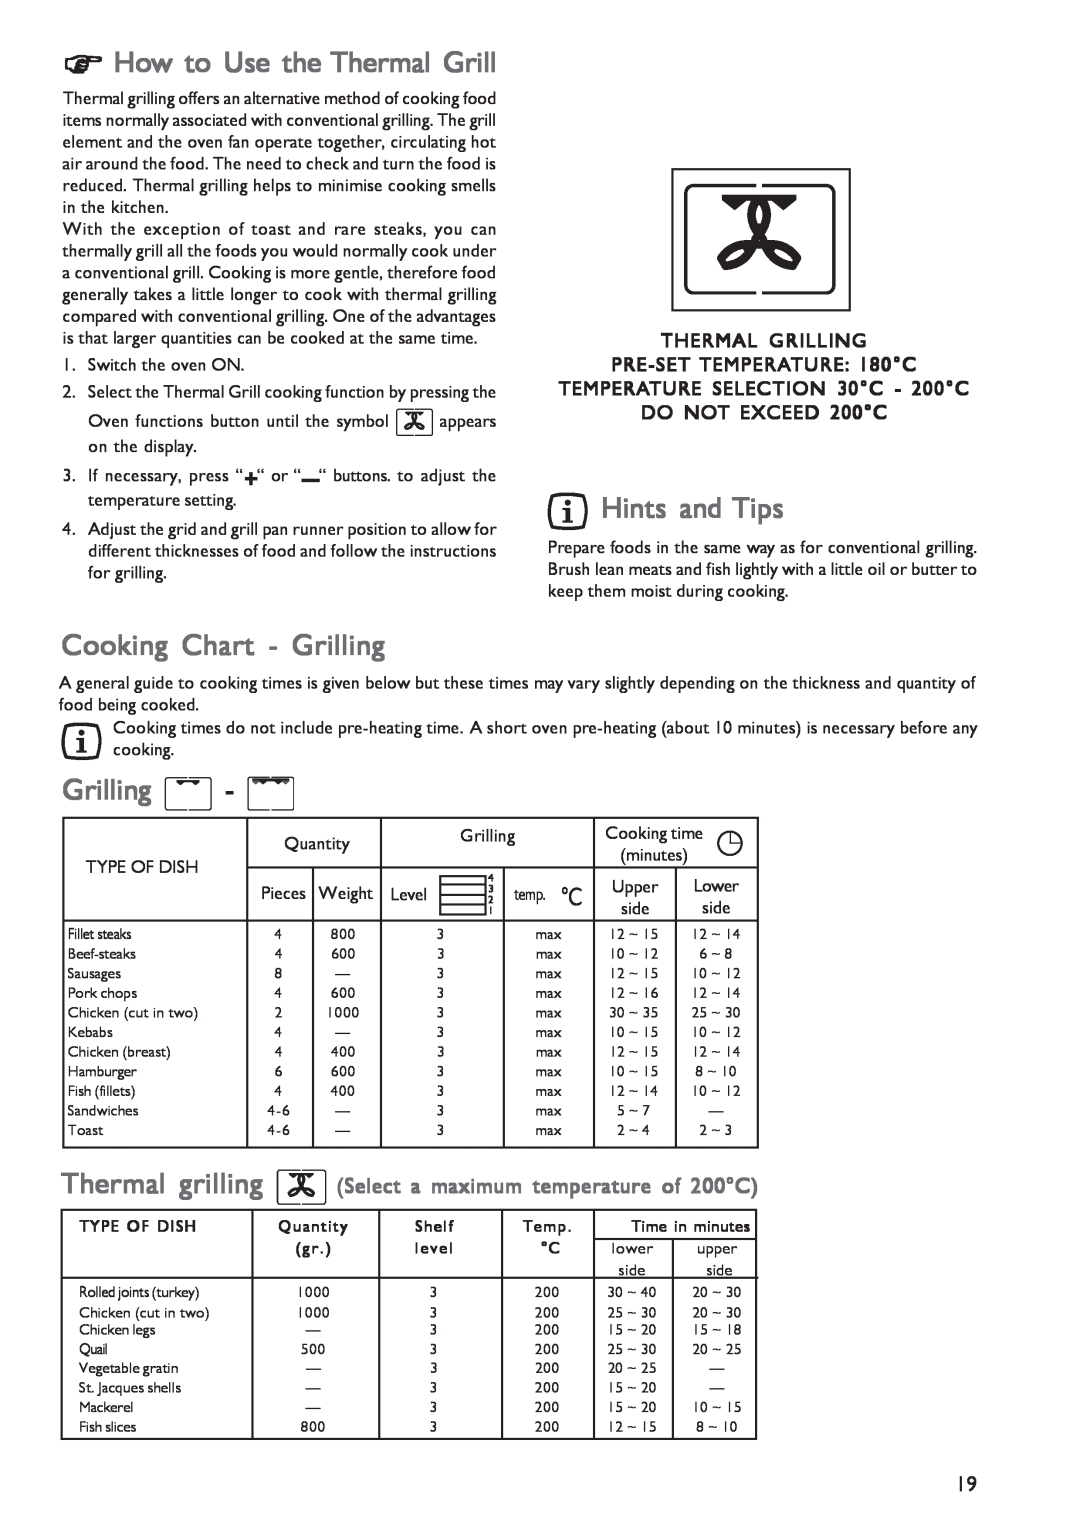 John Lewis JLBIOS603 How to Use the Thermal Grill, Cooking Chart - Grilling, Hints and Tips, DO NOT EXCEED 200C 